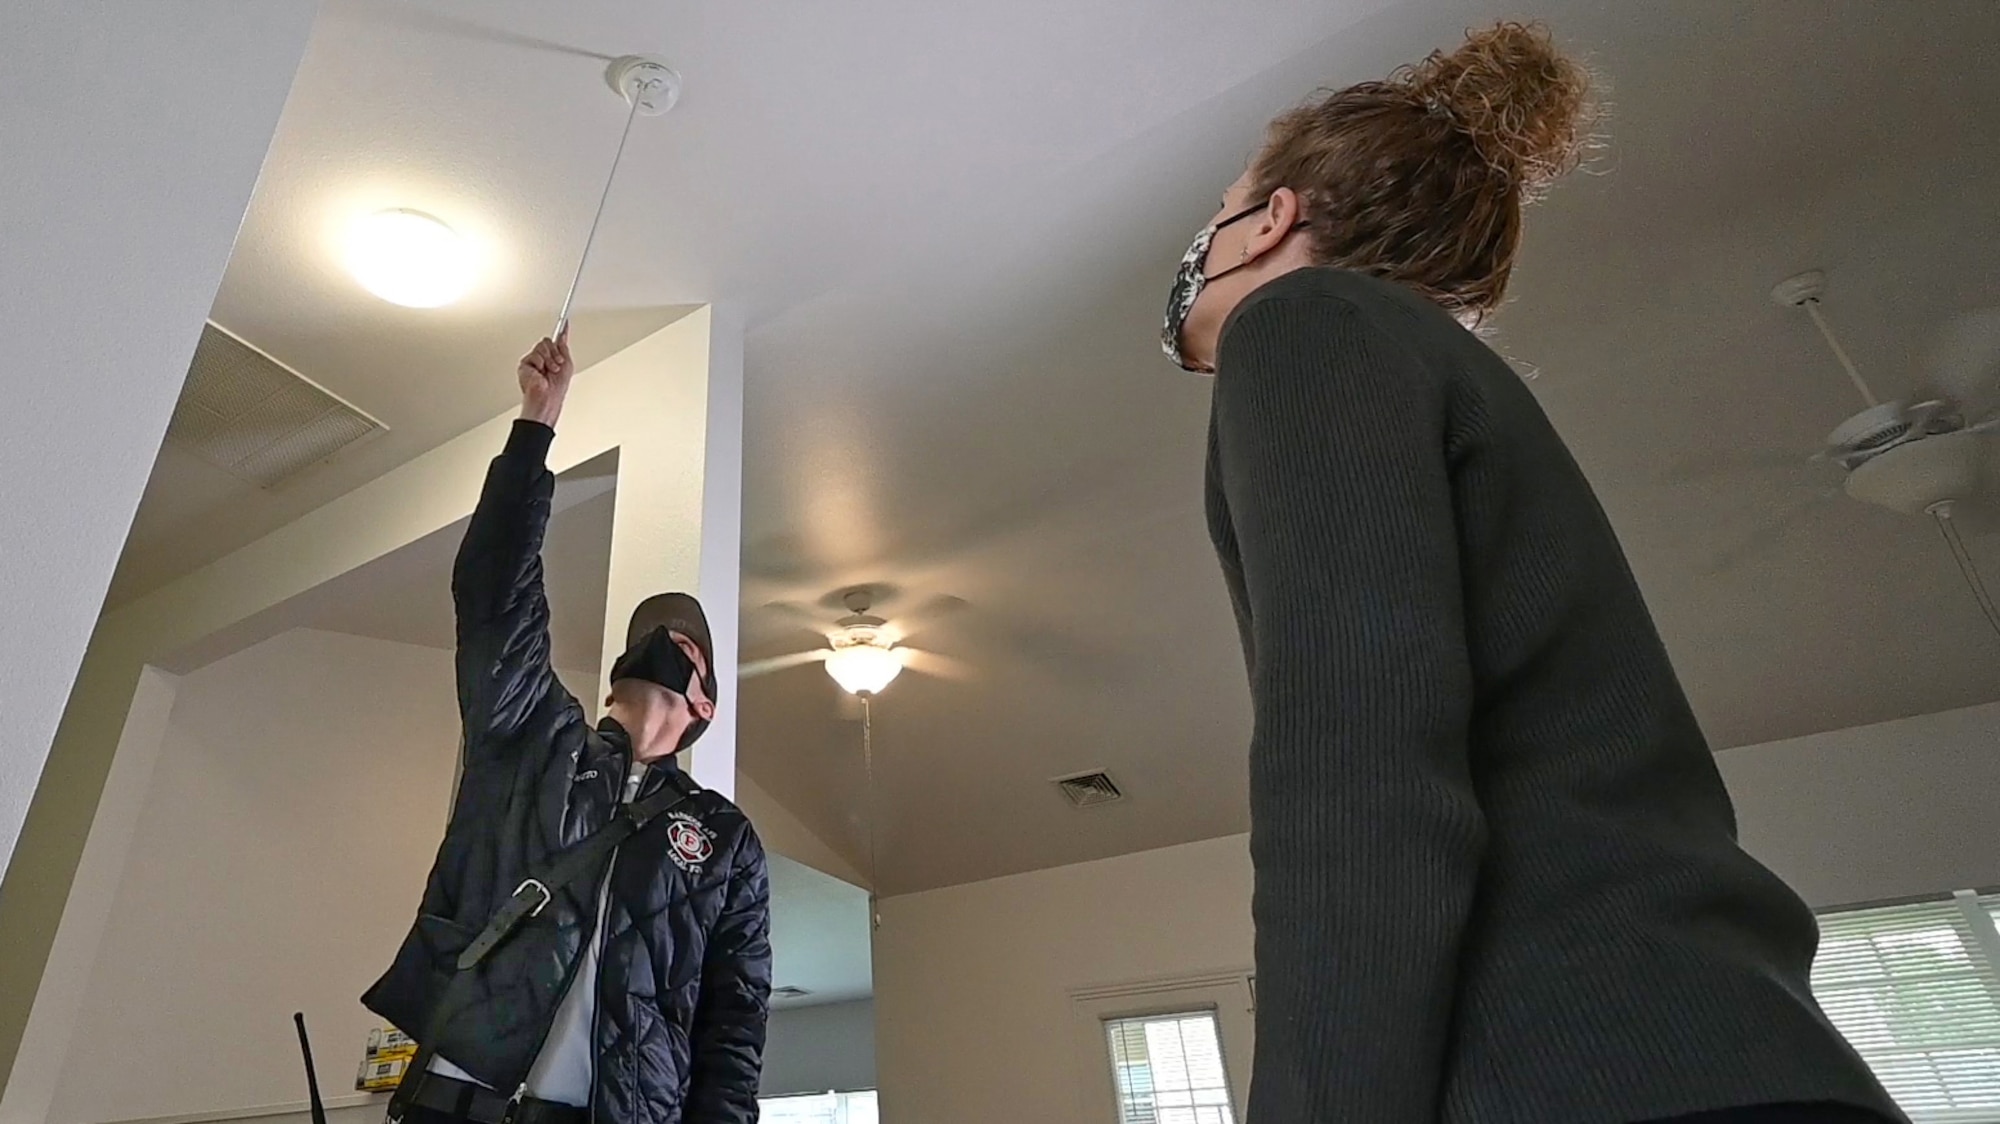 Hanscom Fire Lt. Casey Videtto tests a smoke alarm while LauraLee Morris, Hanscom’s resident advocate, looks on.